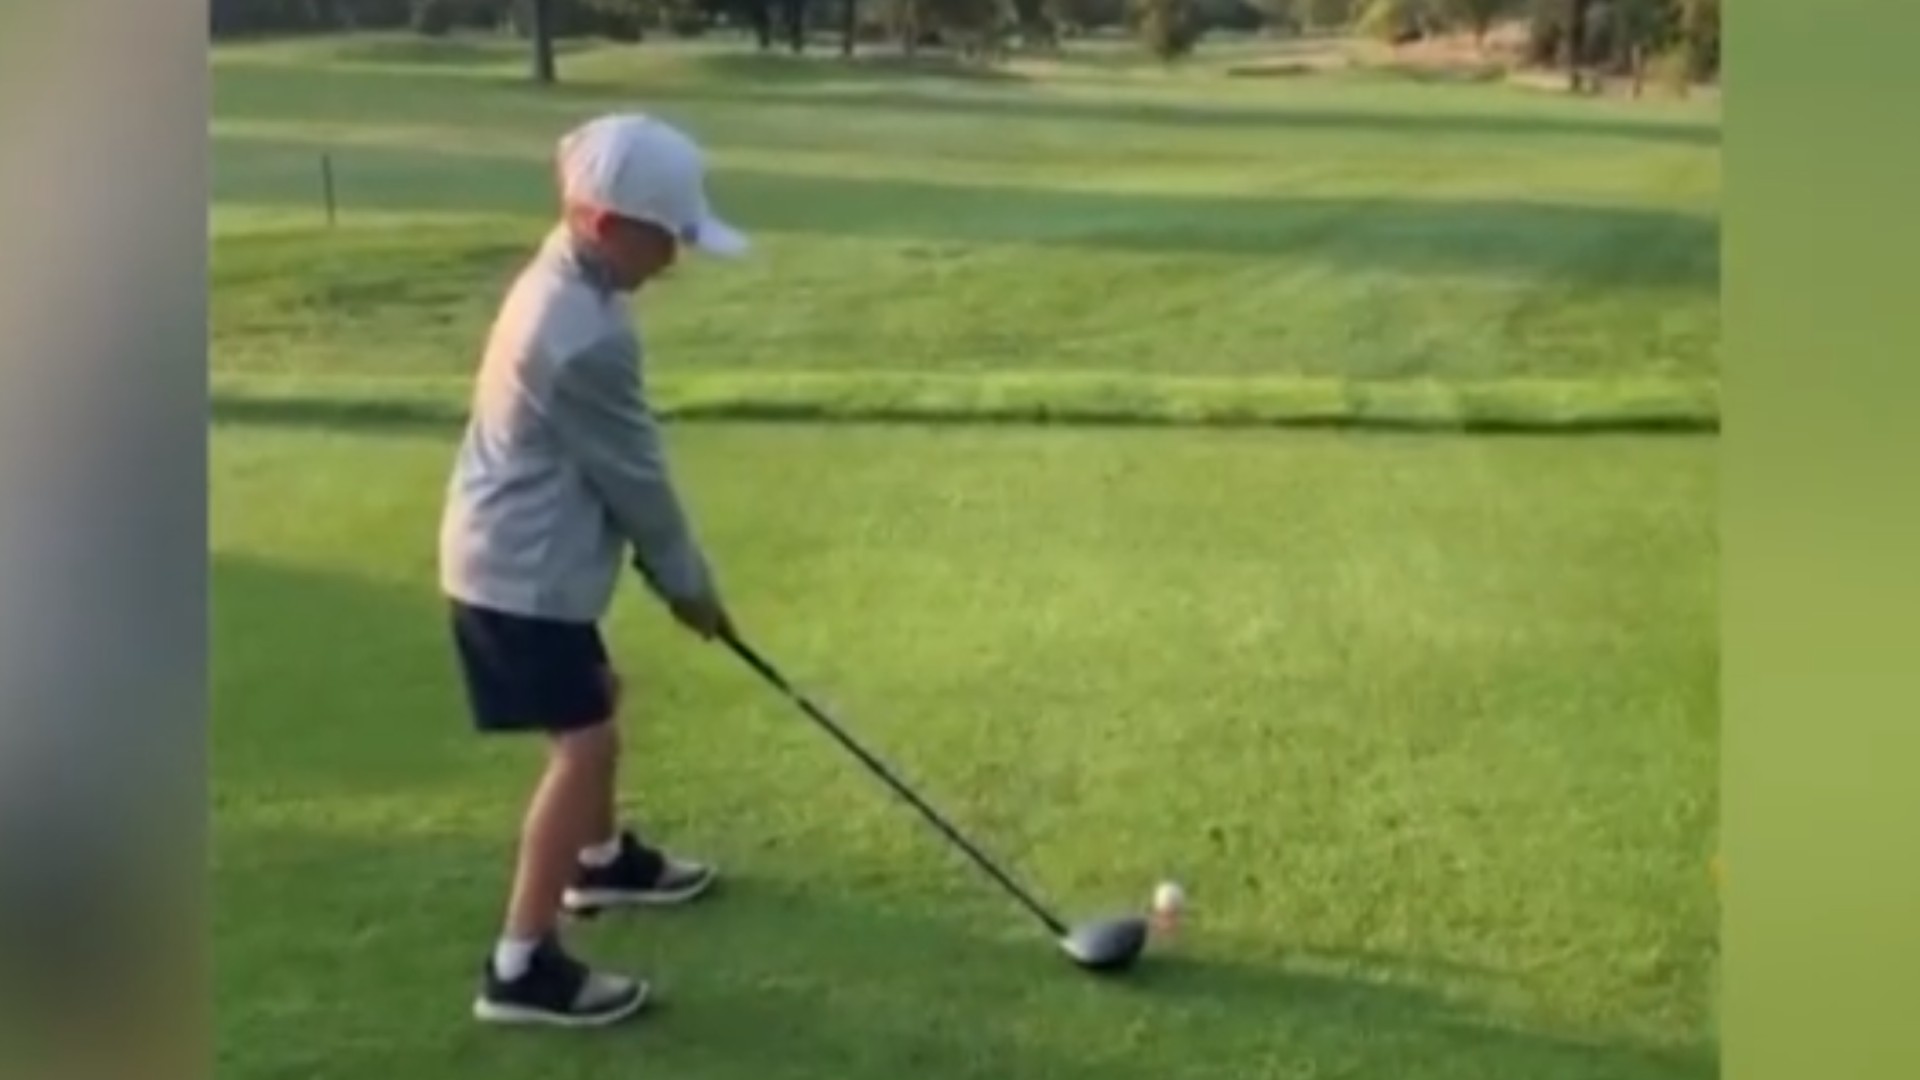 7-Year-Old Golf Protege’s Trick Shots Go Viral